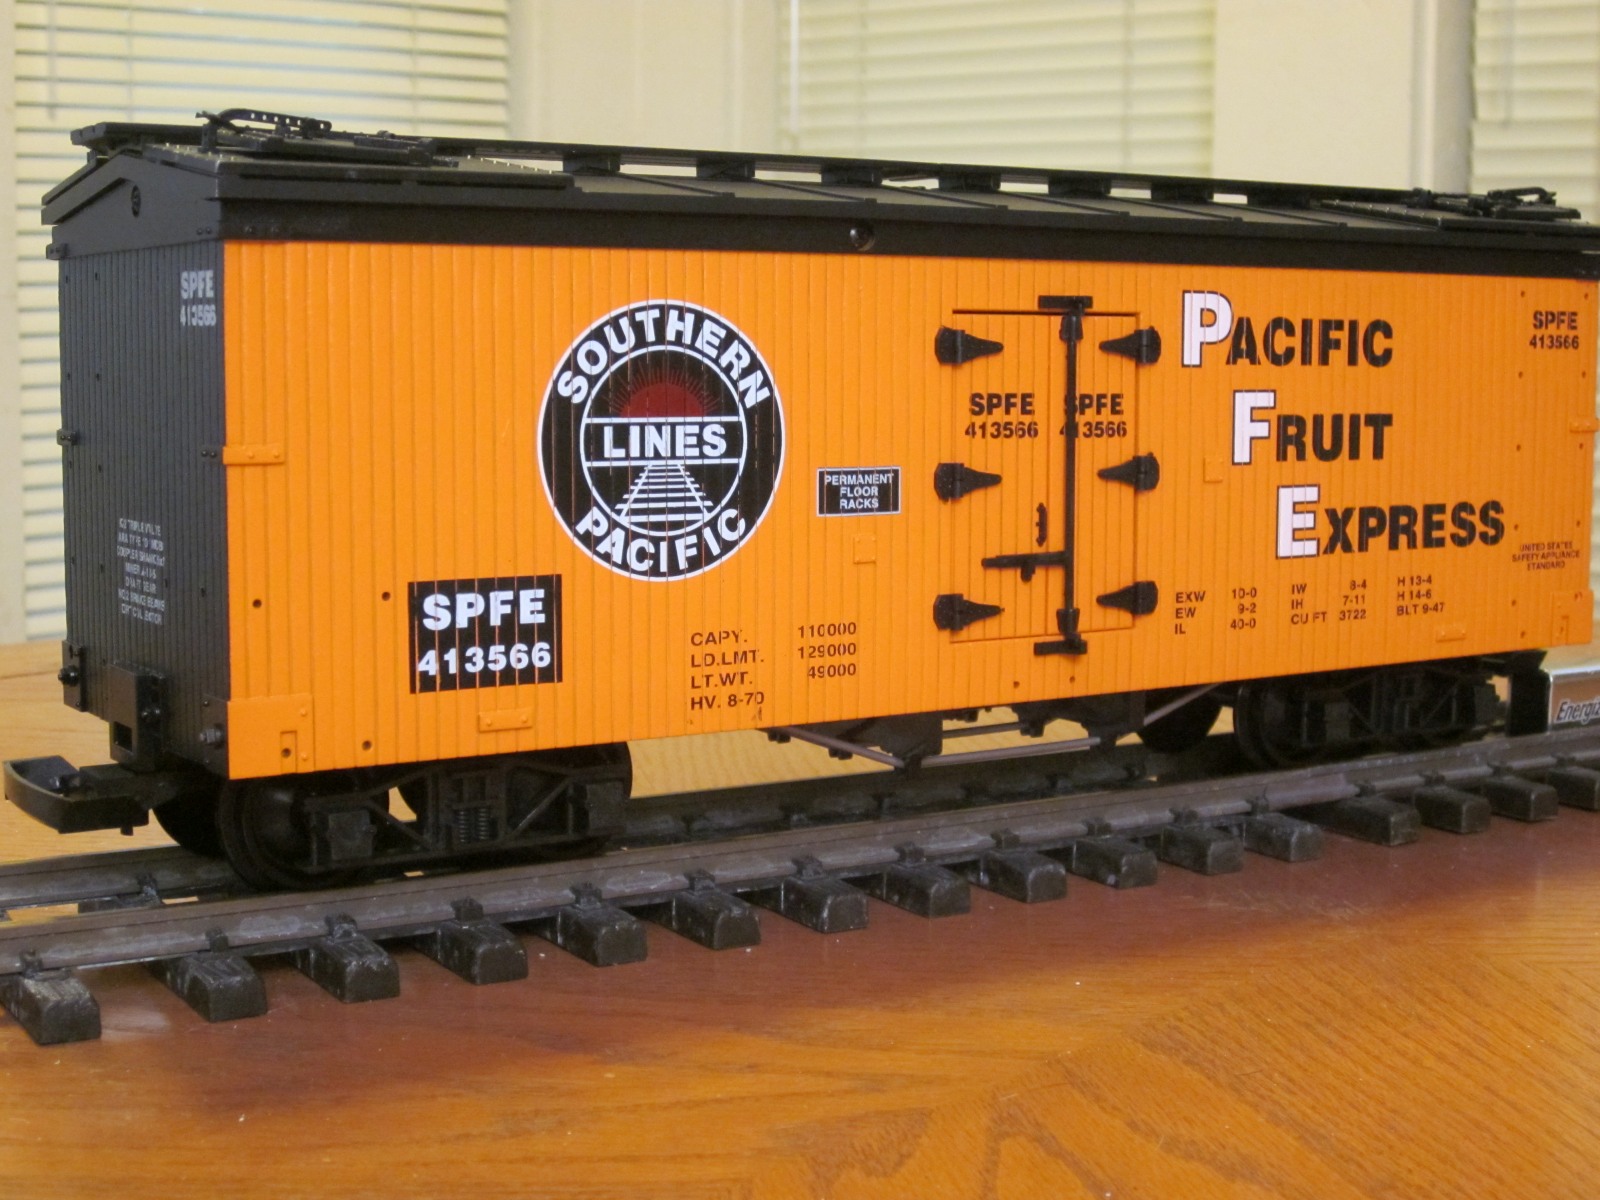 R16047 PFE Southern Pacific SPFE 413566